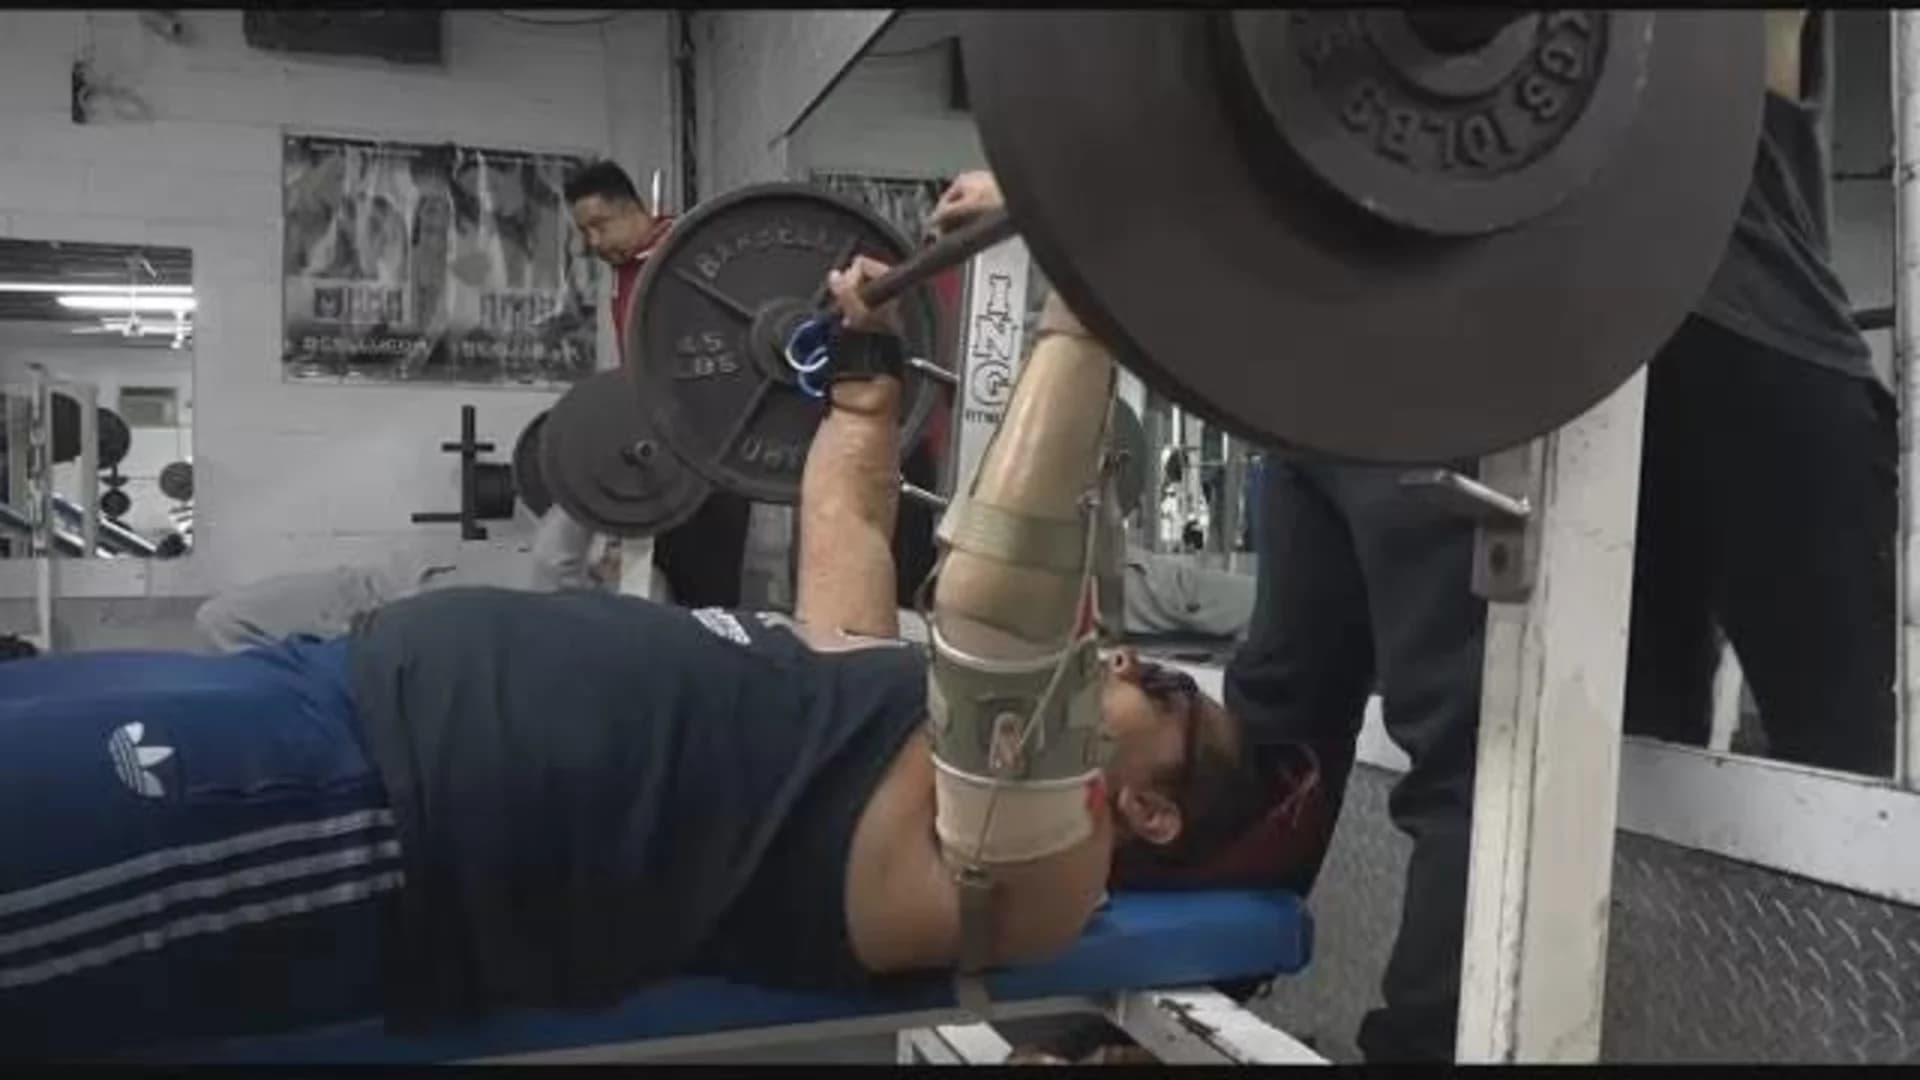 Bronx man with prosthetics competes as powerlifter